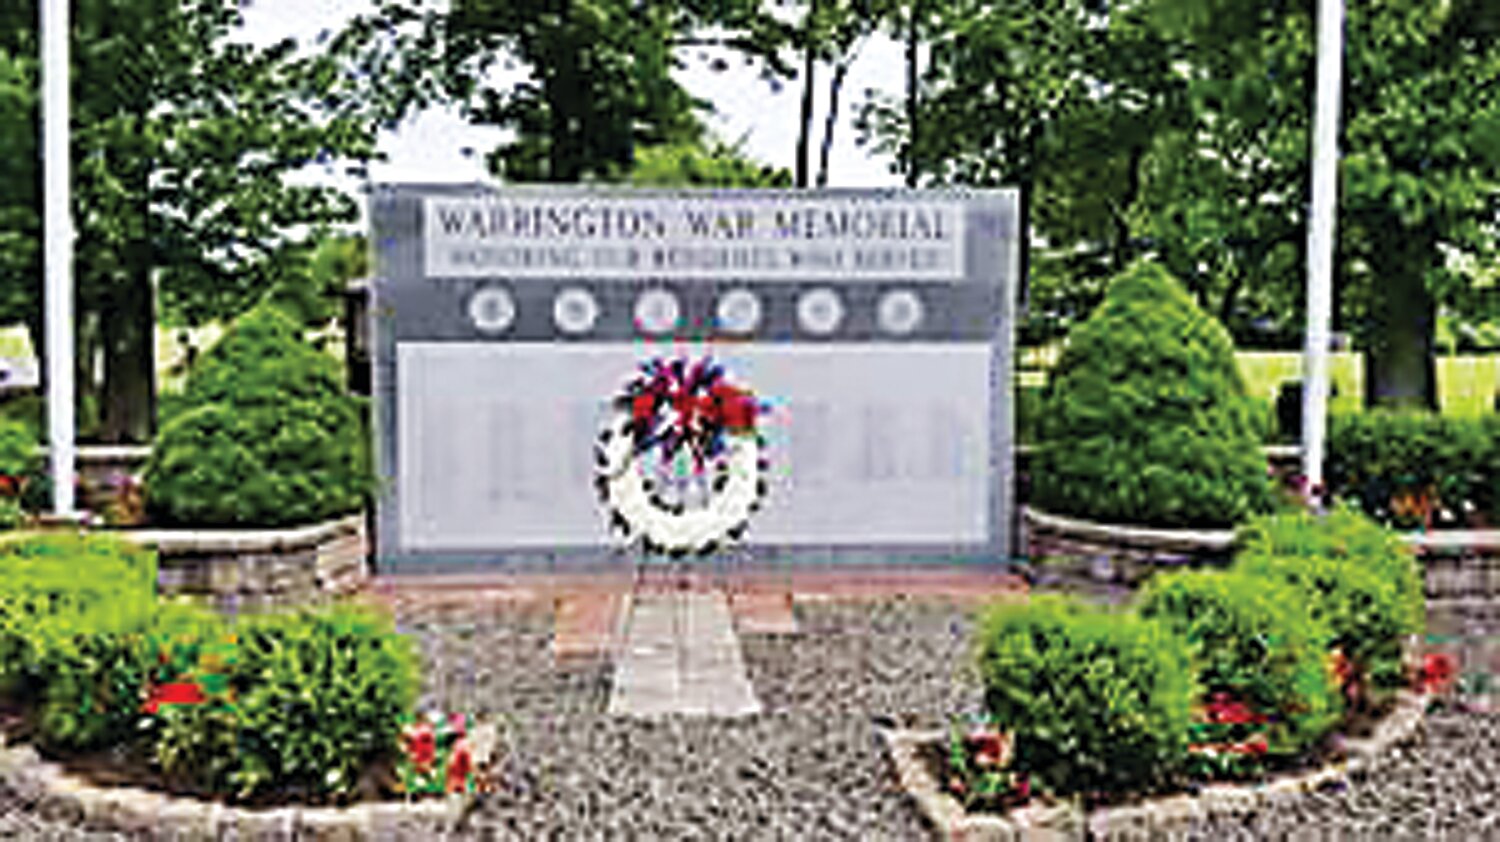 A name will be added to Warrington’s Memorial Wall at the Igoe Porter Wellings (IPW) Memorial Field during the township’s Memorial Day Ceremony.